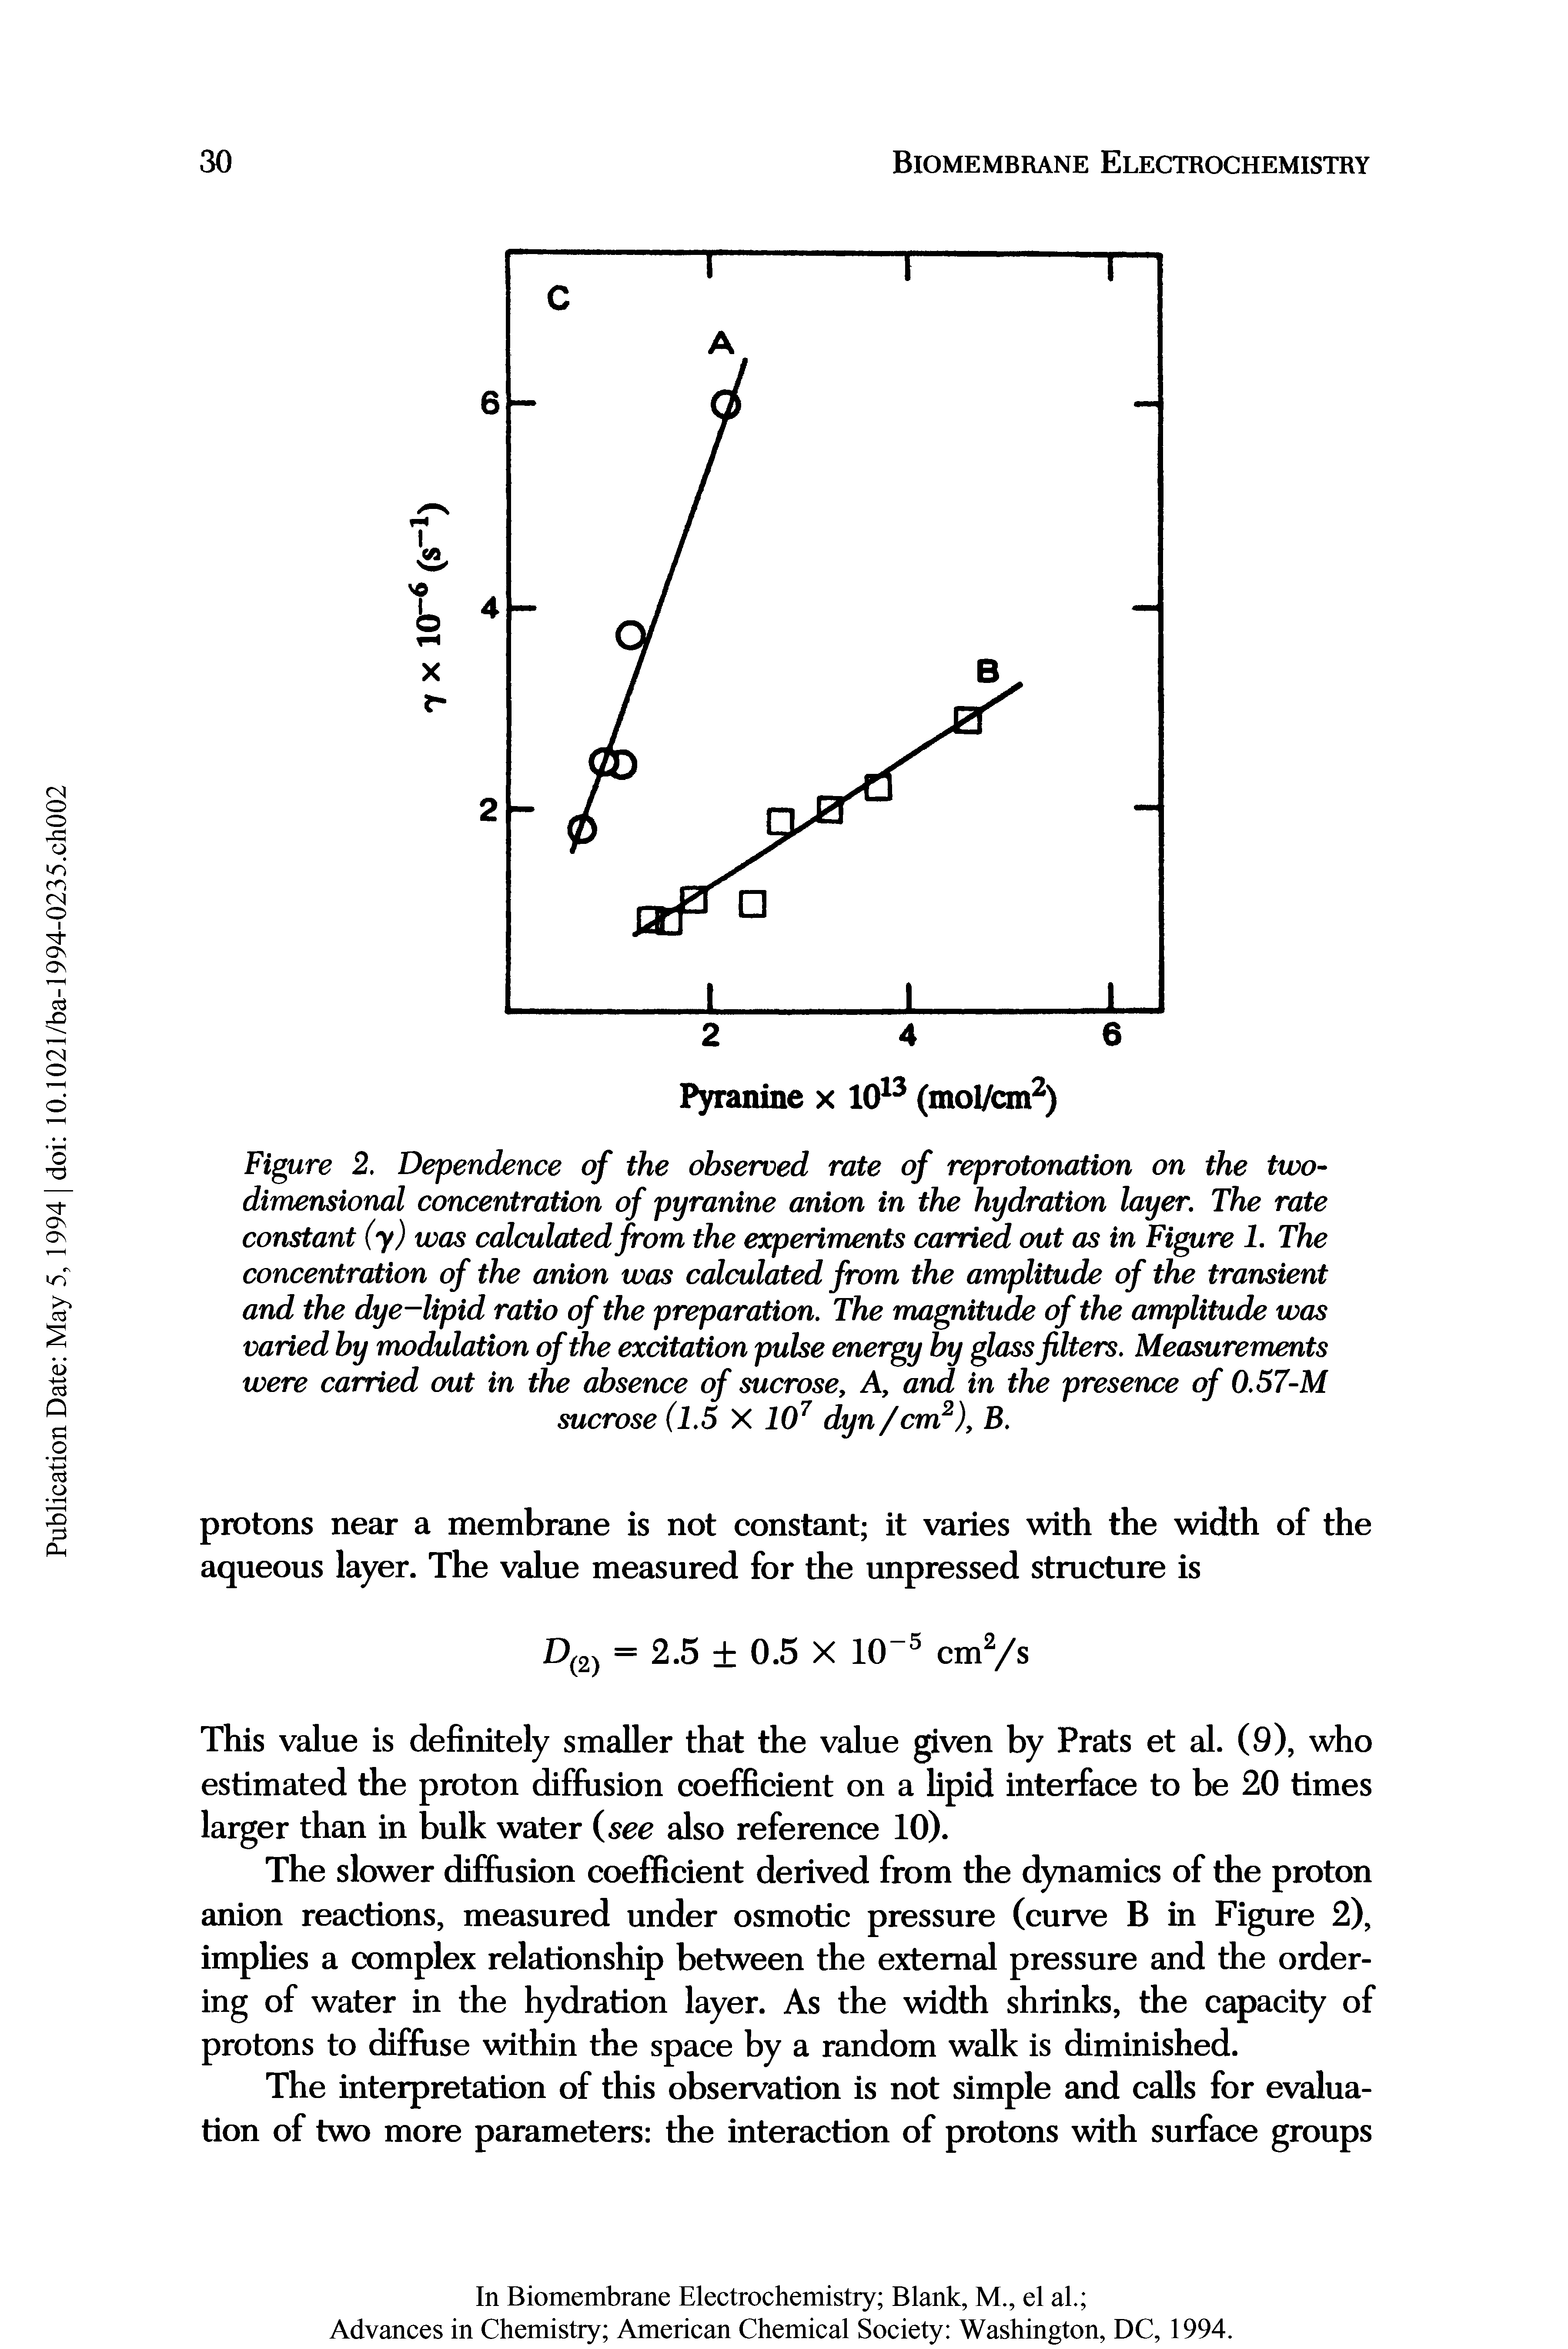 Figure 2. Dependence of the observed rate of reprotonation on the two-dimensional concentration of pyranine anion in the hydration layer. The rate constant (y) was calculated from the experiments carried out as in Figure 1. The concentration of the anion was calculated from the amplitude of the transient and the dye-lipid ratio of the preparation. The magnitude of the amplitude was varied by modulation of the excitation pulse energy by glass filters. Measurements were carried out in the absence of sucrose, A, and in the presence of 0.57-M sucrose (1.5 X 107 dyn/cm2), B.